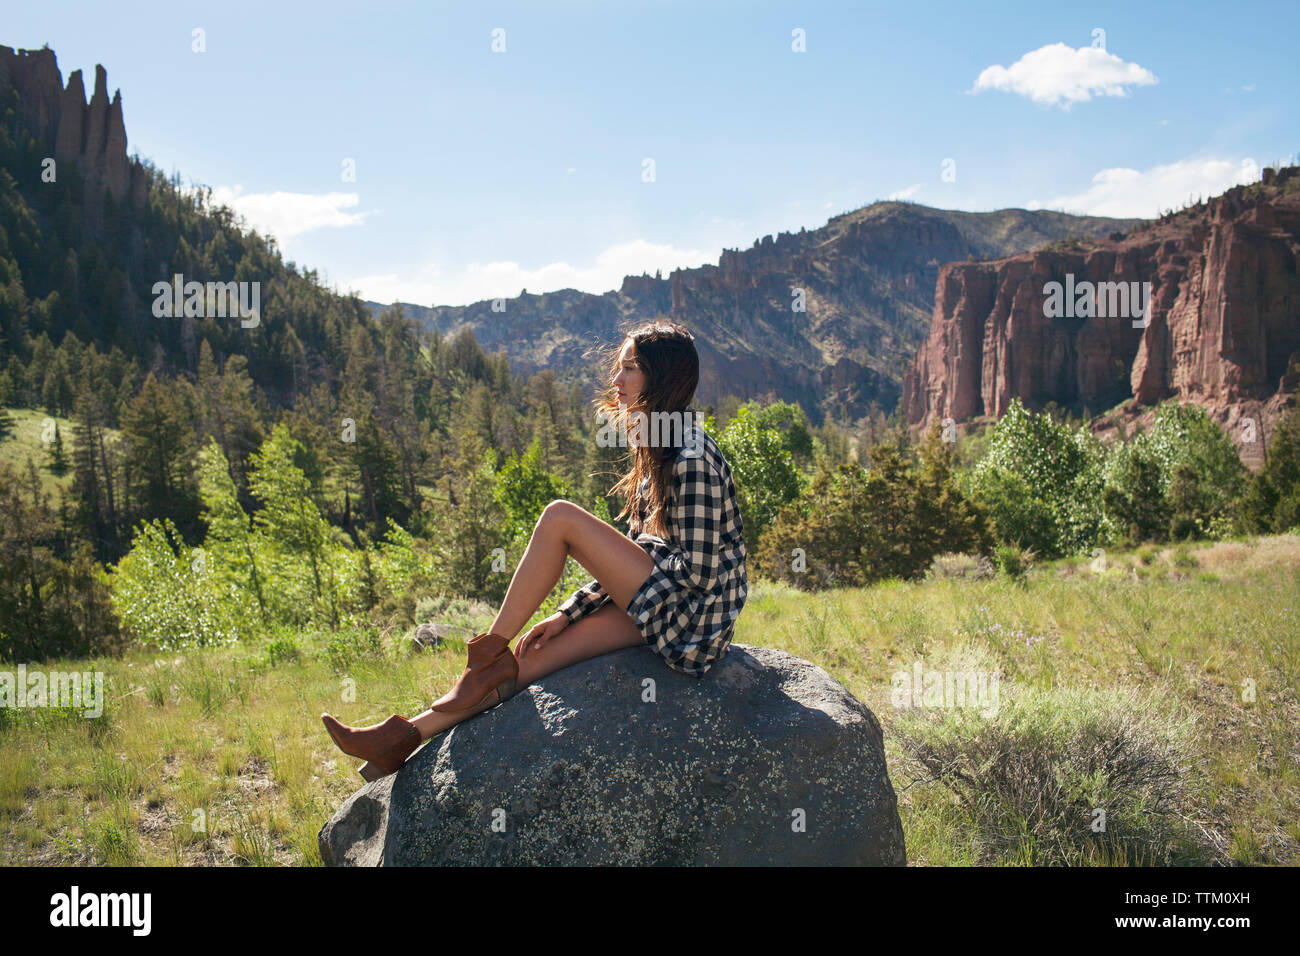 Side view of woman sitting on rock at grassy field against mountains Stock Photo